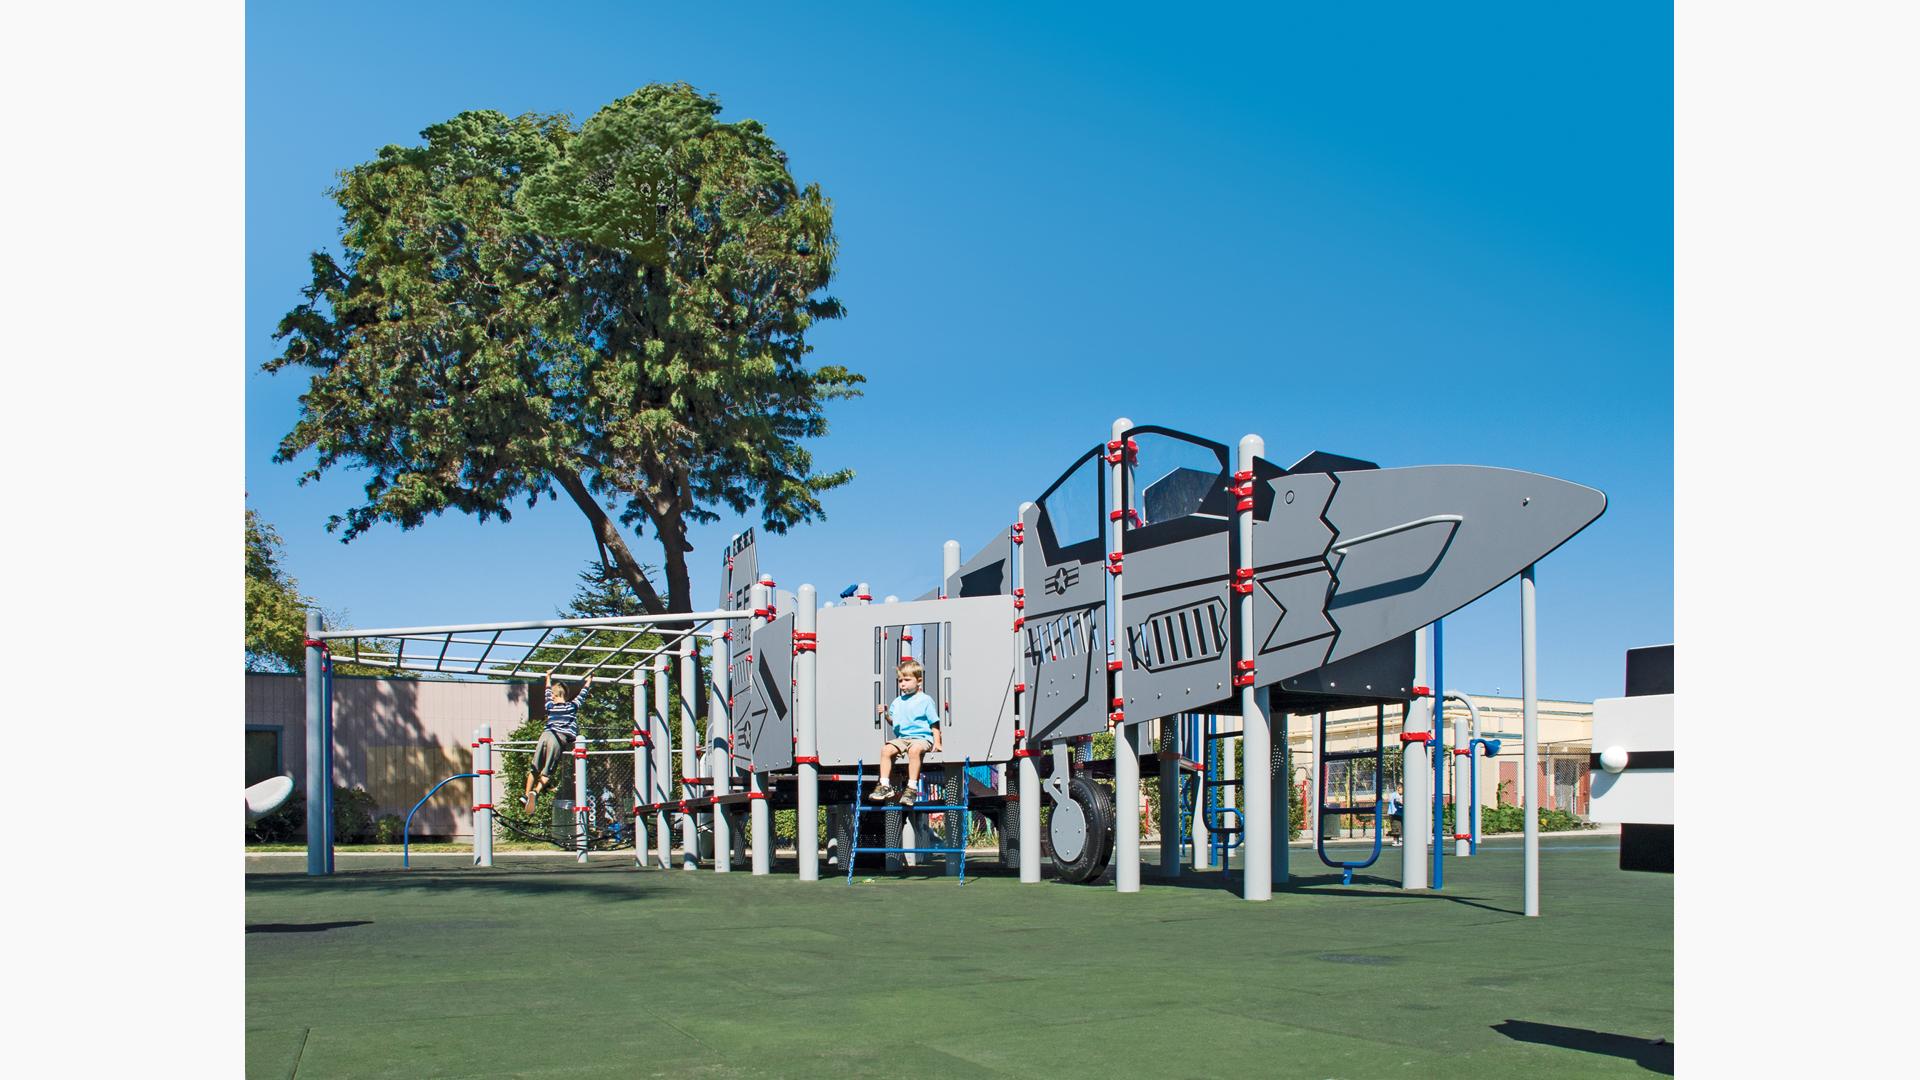 An authentic F-6 Skyray jet fighter—we created a fighter jet using Permalene® panels, as well as a custom PlayBooster® playstructure offers kids ages 5 to 12 fun new opportunities for challenging, imaginative play. The jet fighter theme is carried throughout the playground.